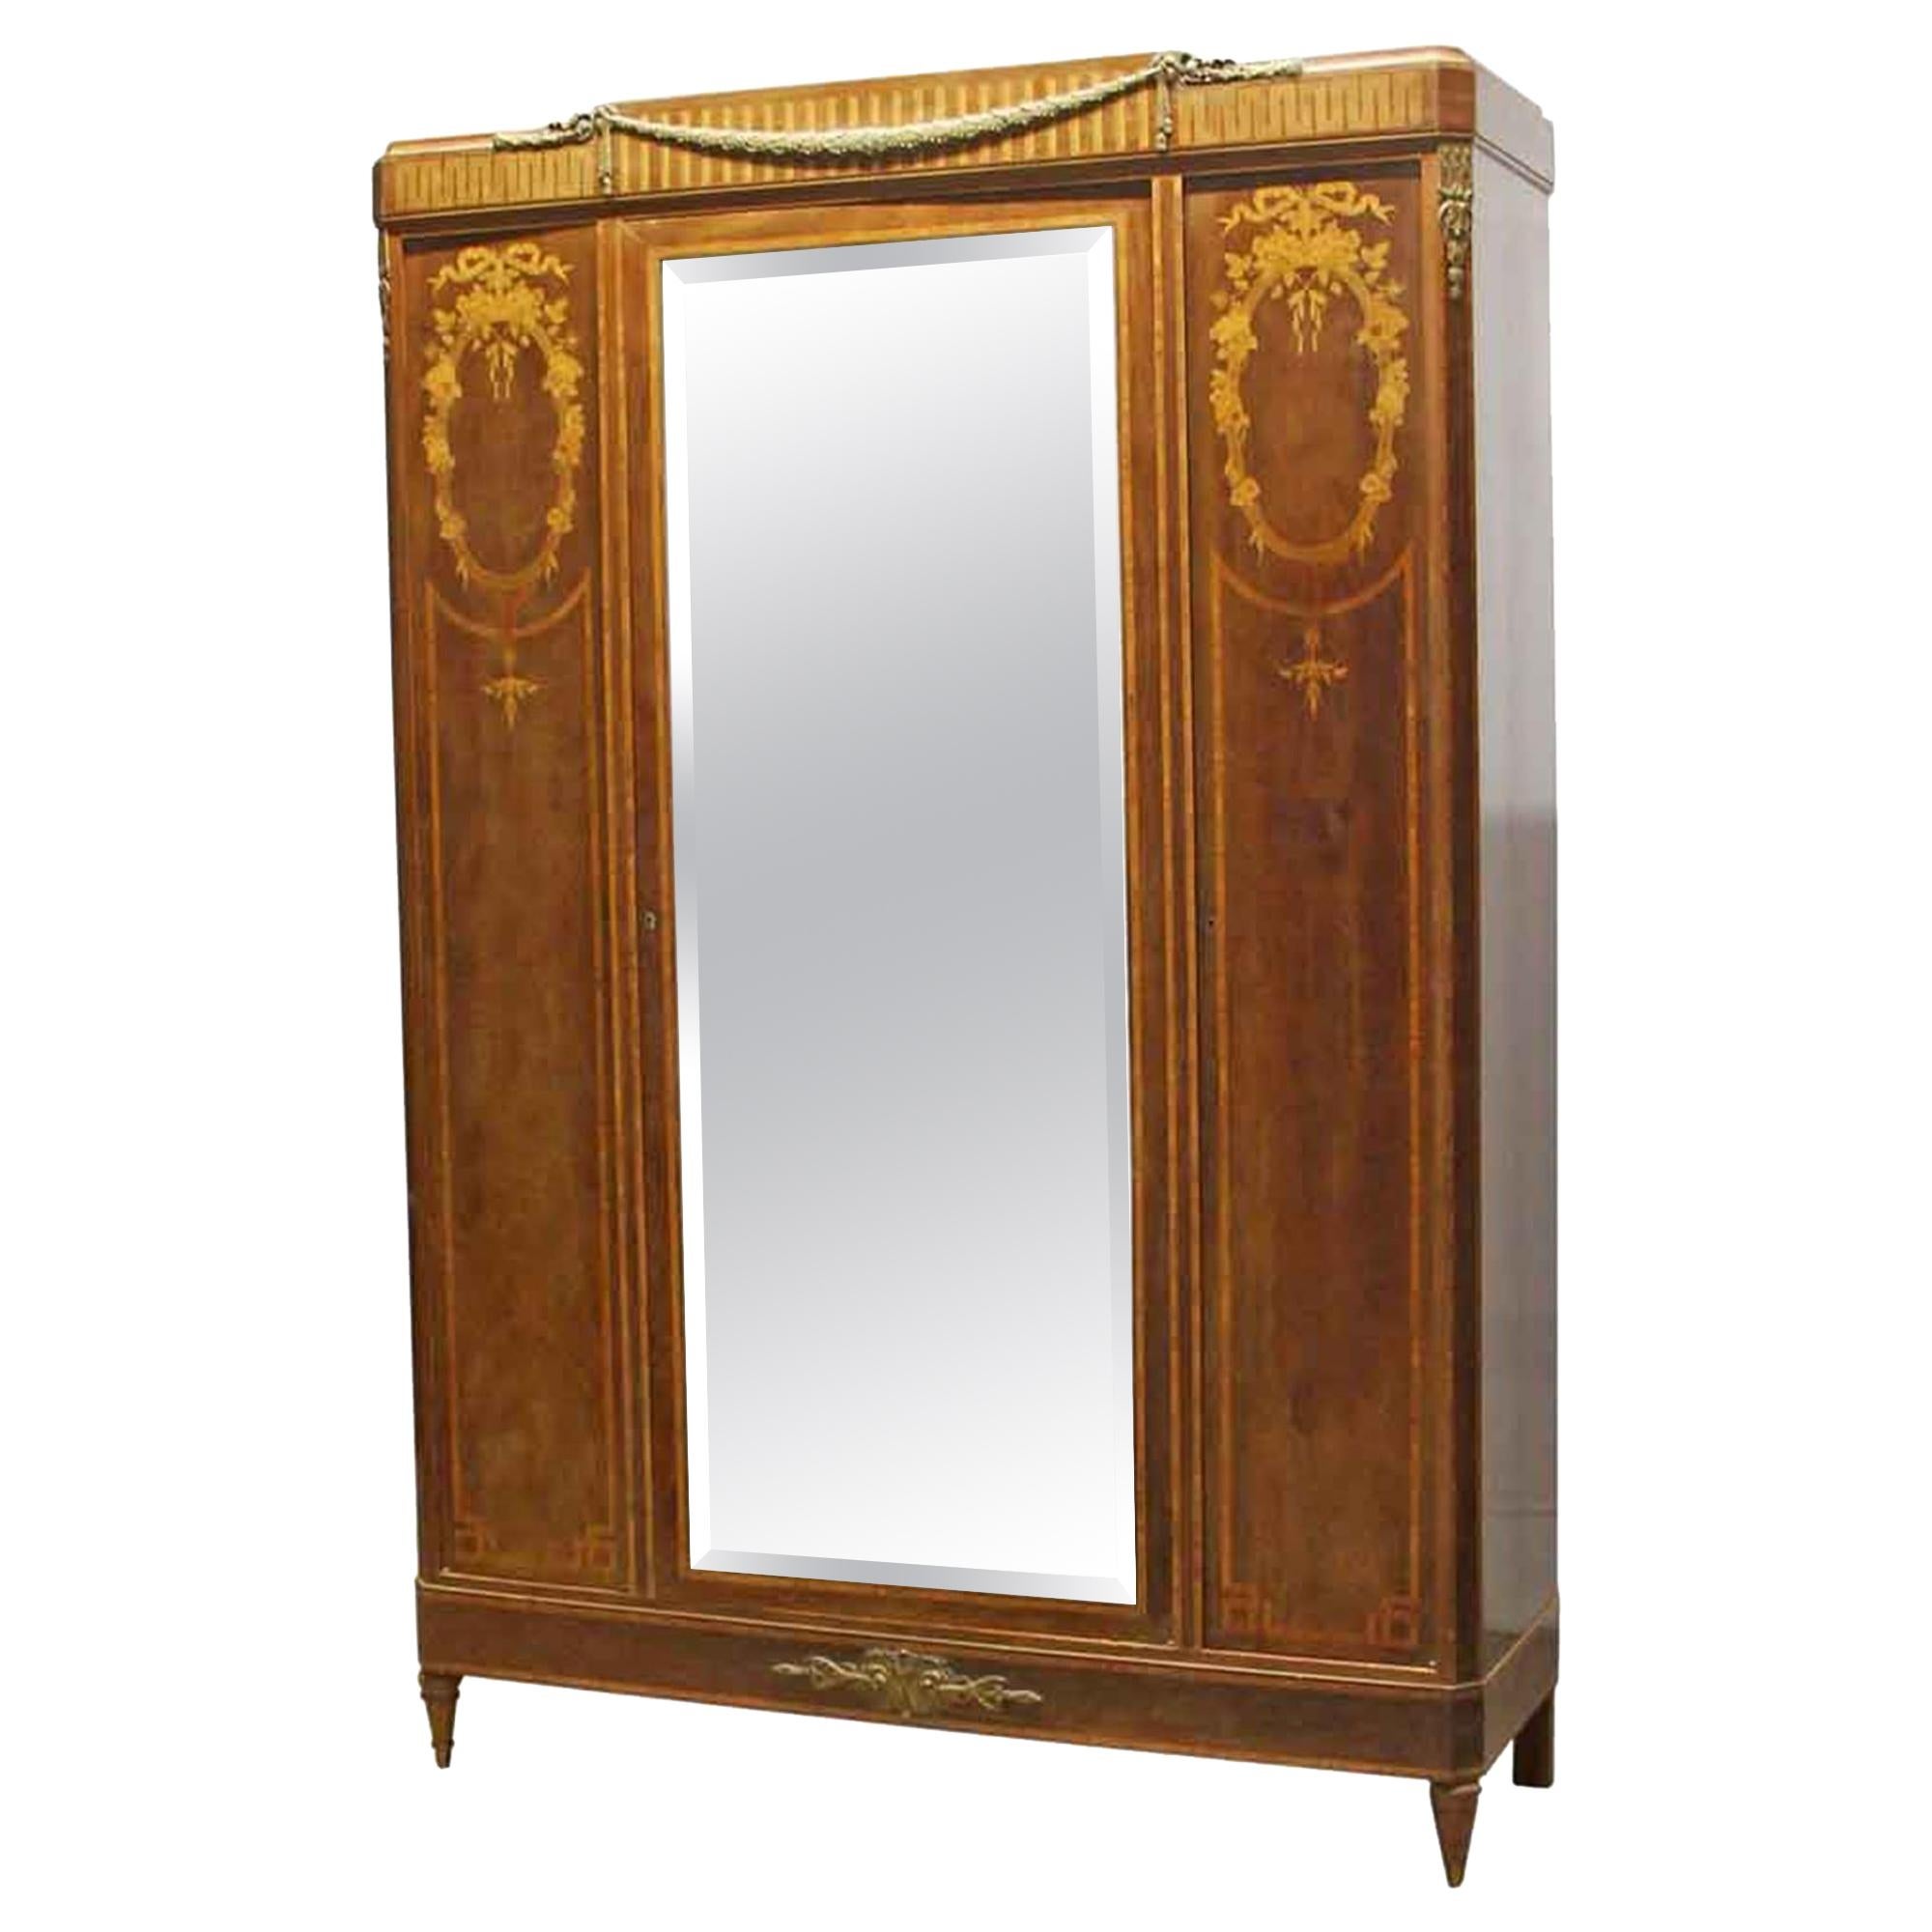 1930s French Art Deco Carved Walnut Mirrored Armoire with Detailed Inlays